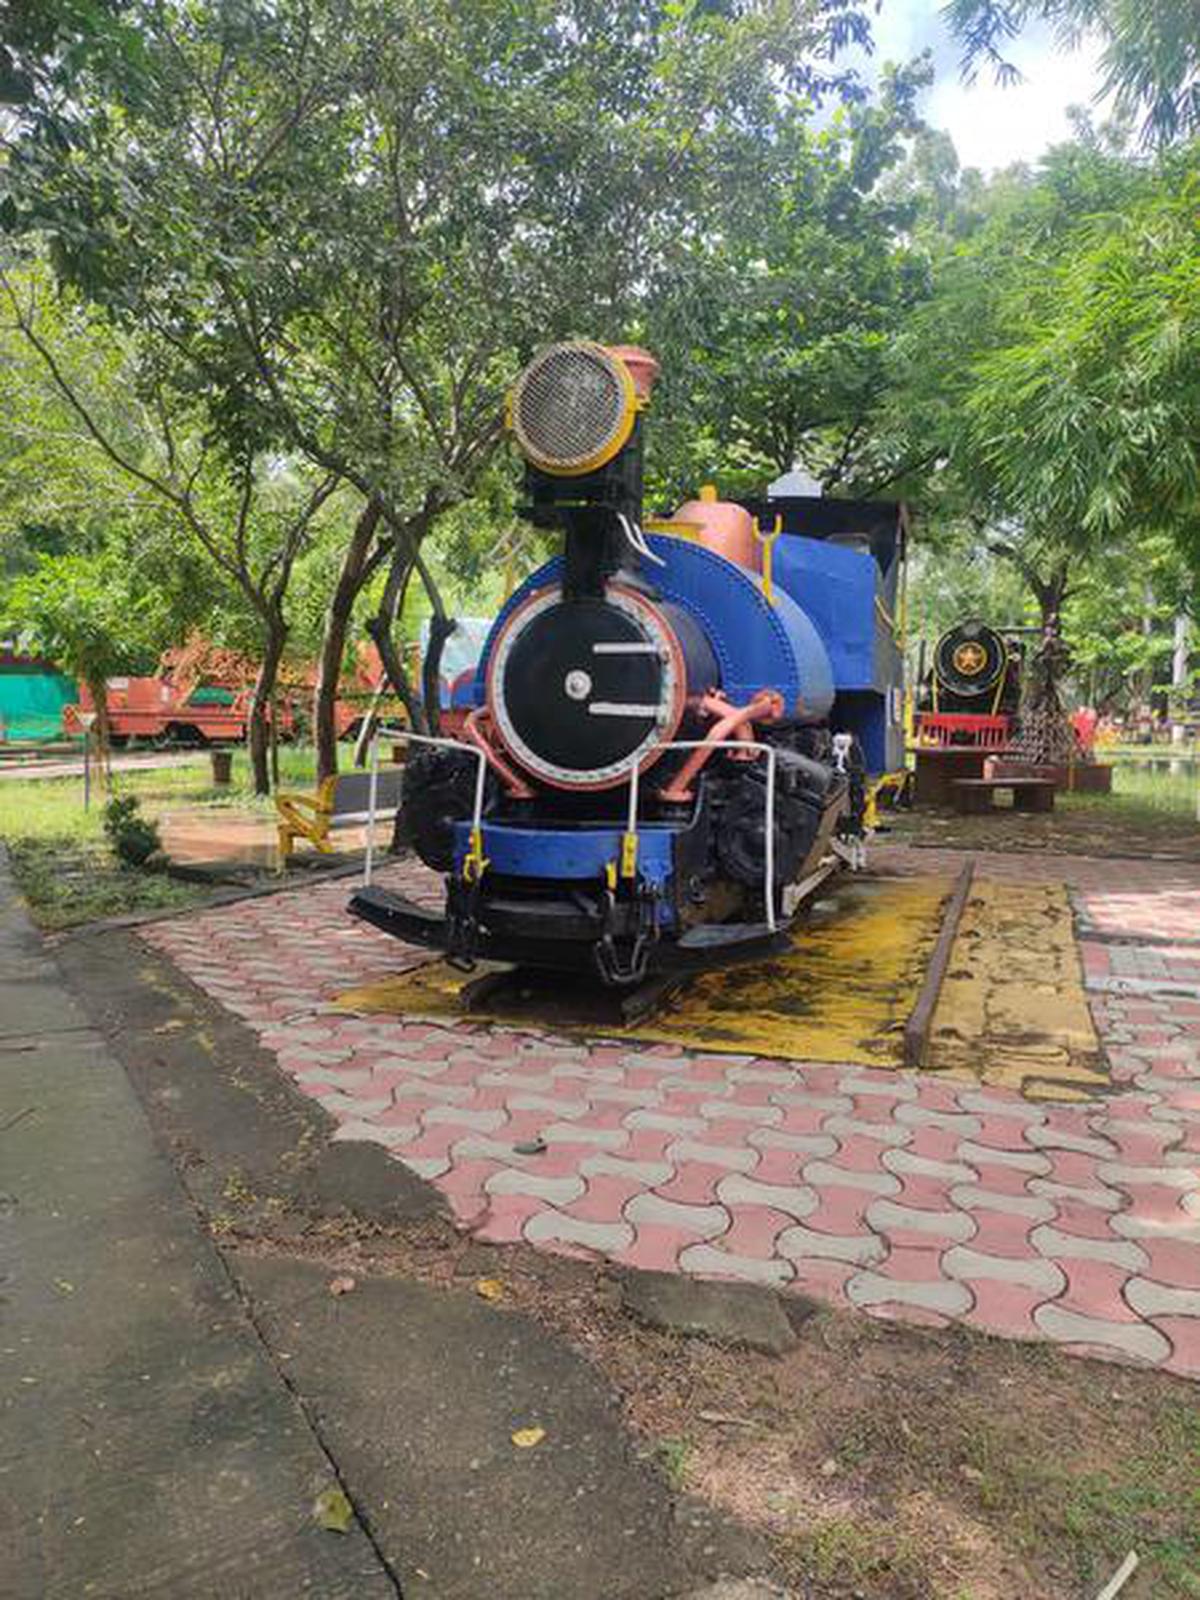 The engine of the Himalayan Darjeeling Railway, painted a Caledonian blue, at the Chennai Rail Museum